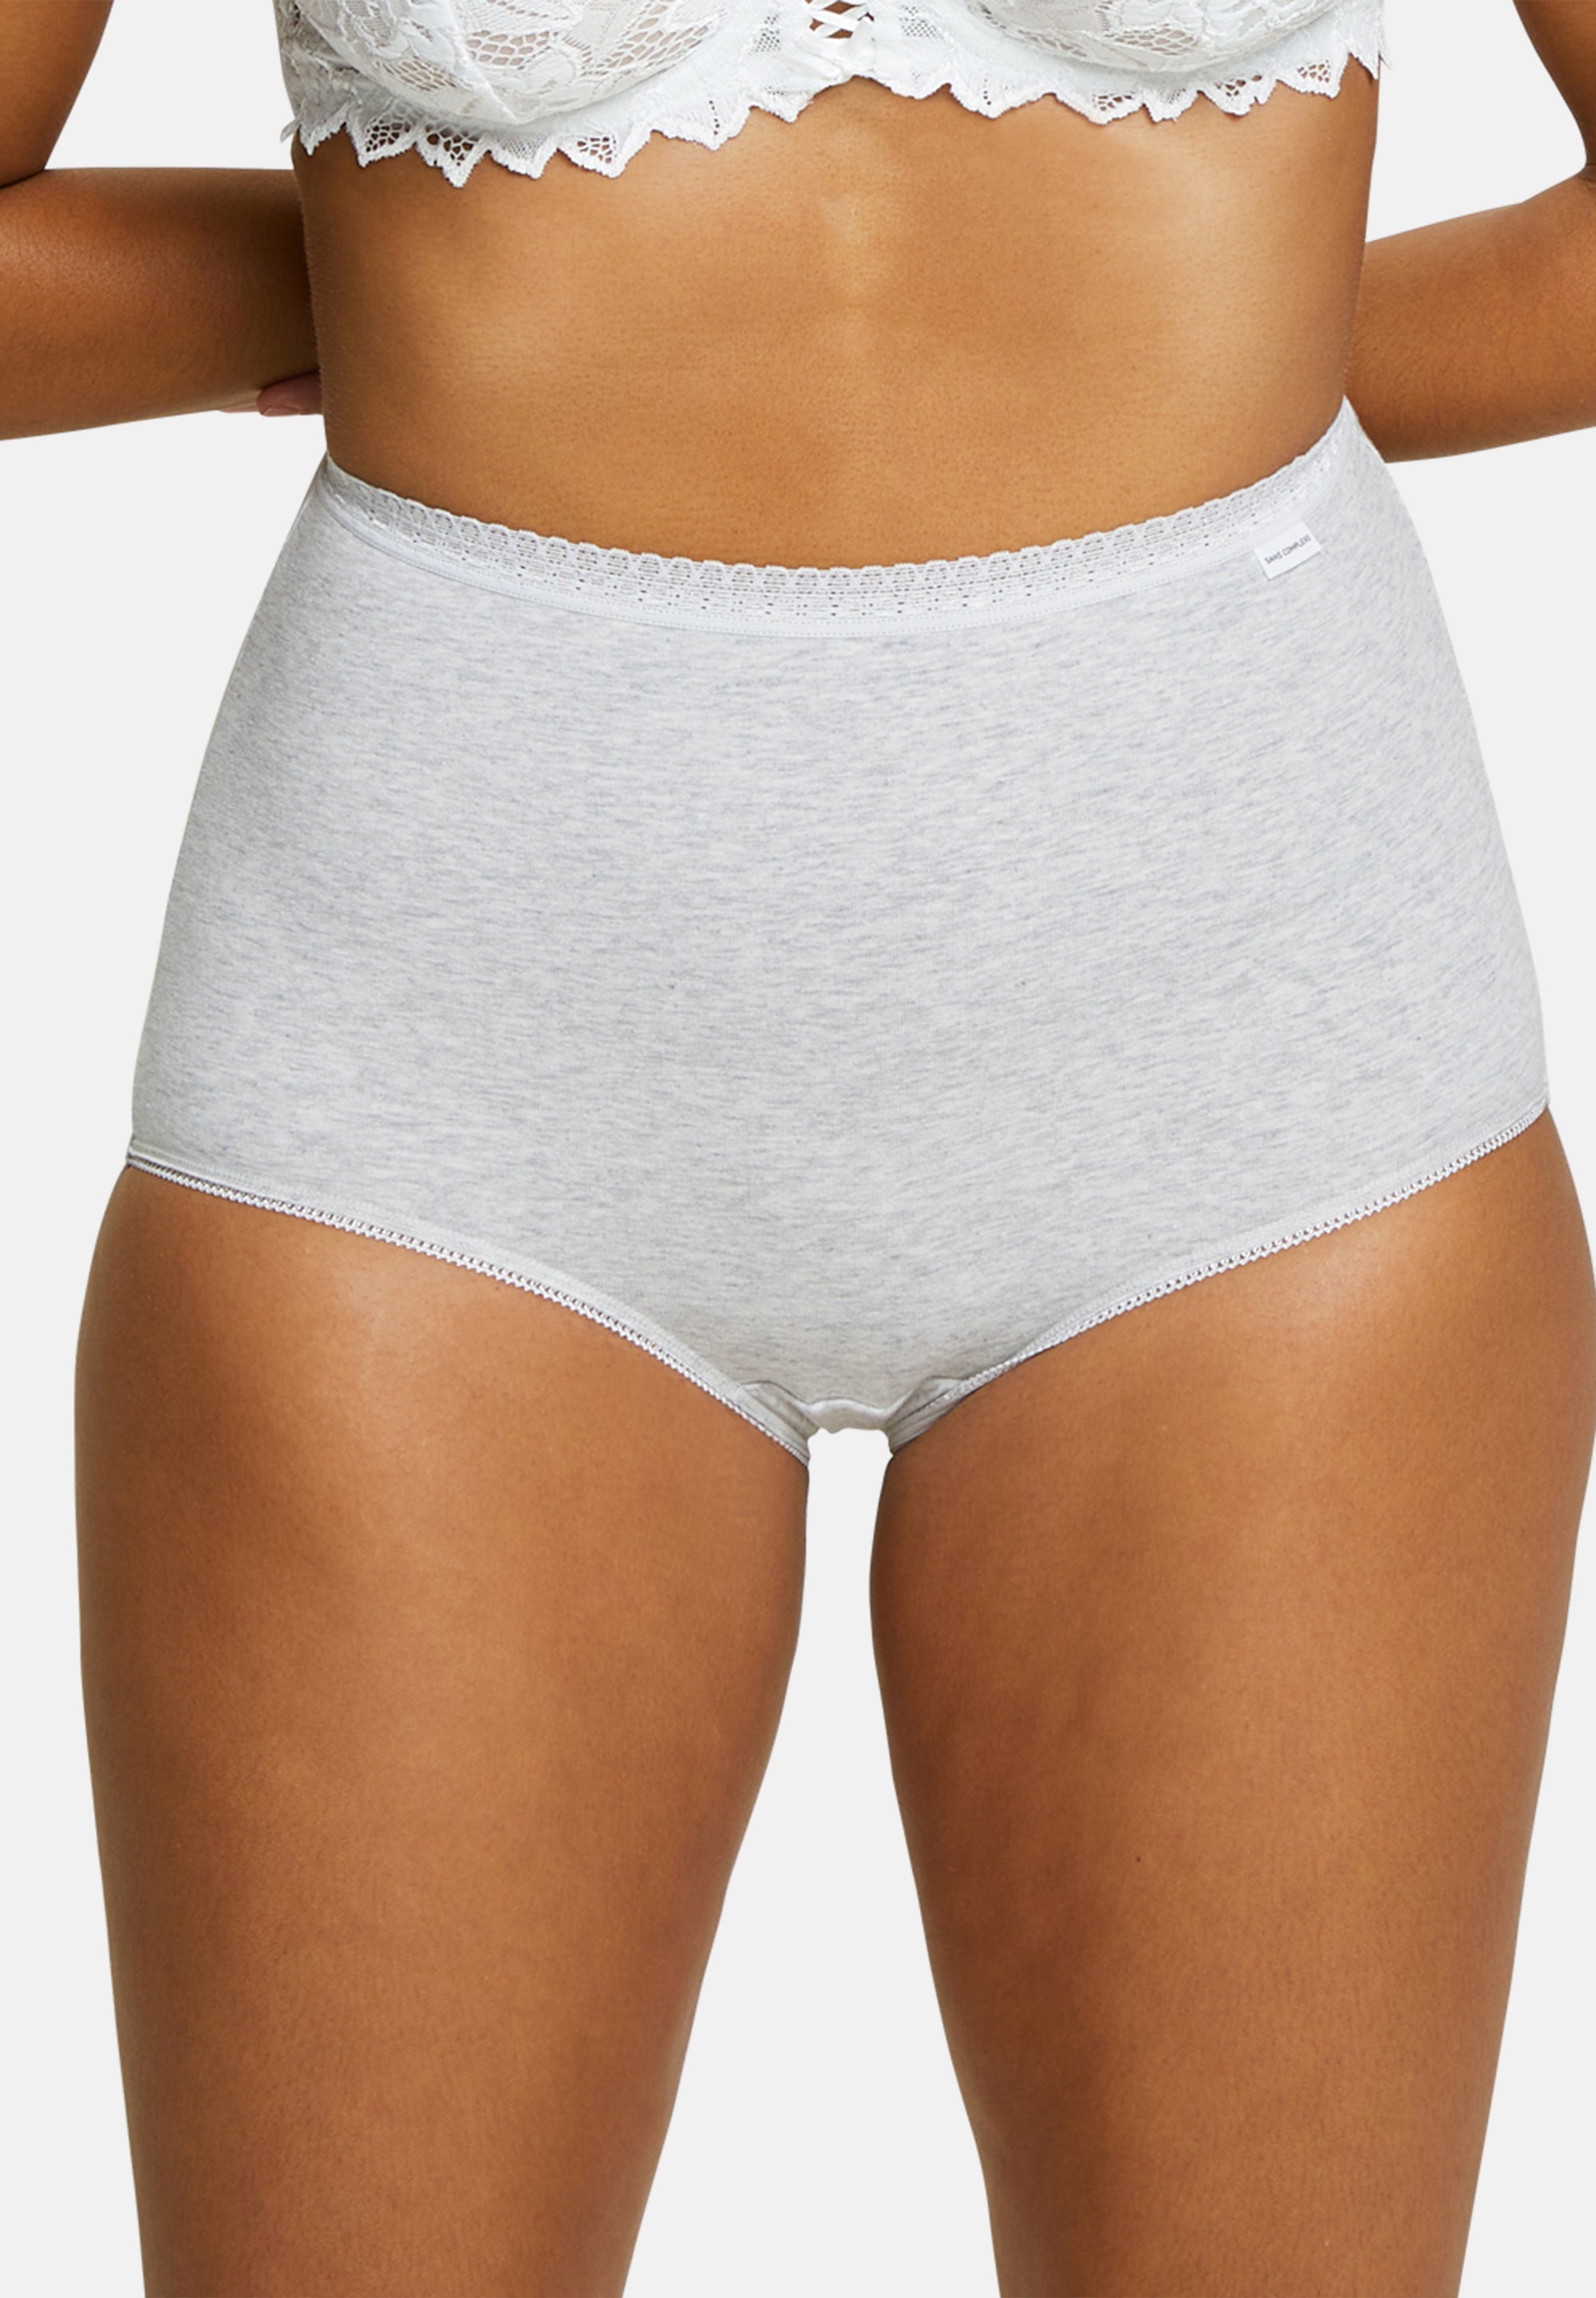 Panties - Pack of 2 Classic Cotton Heather gray 